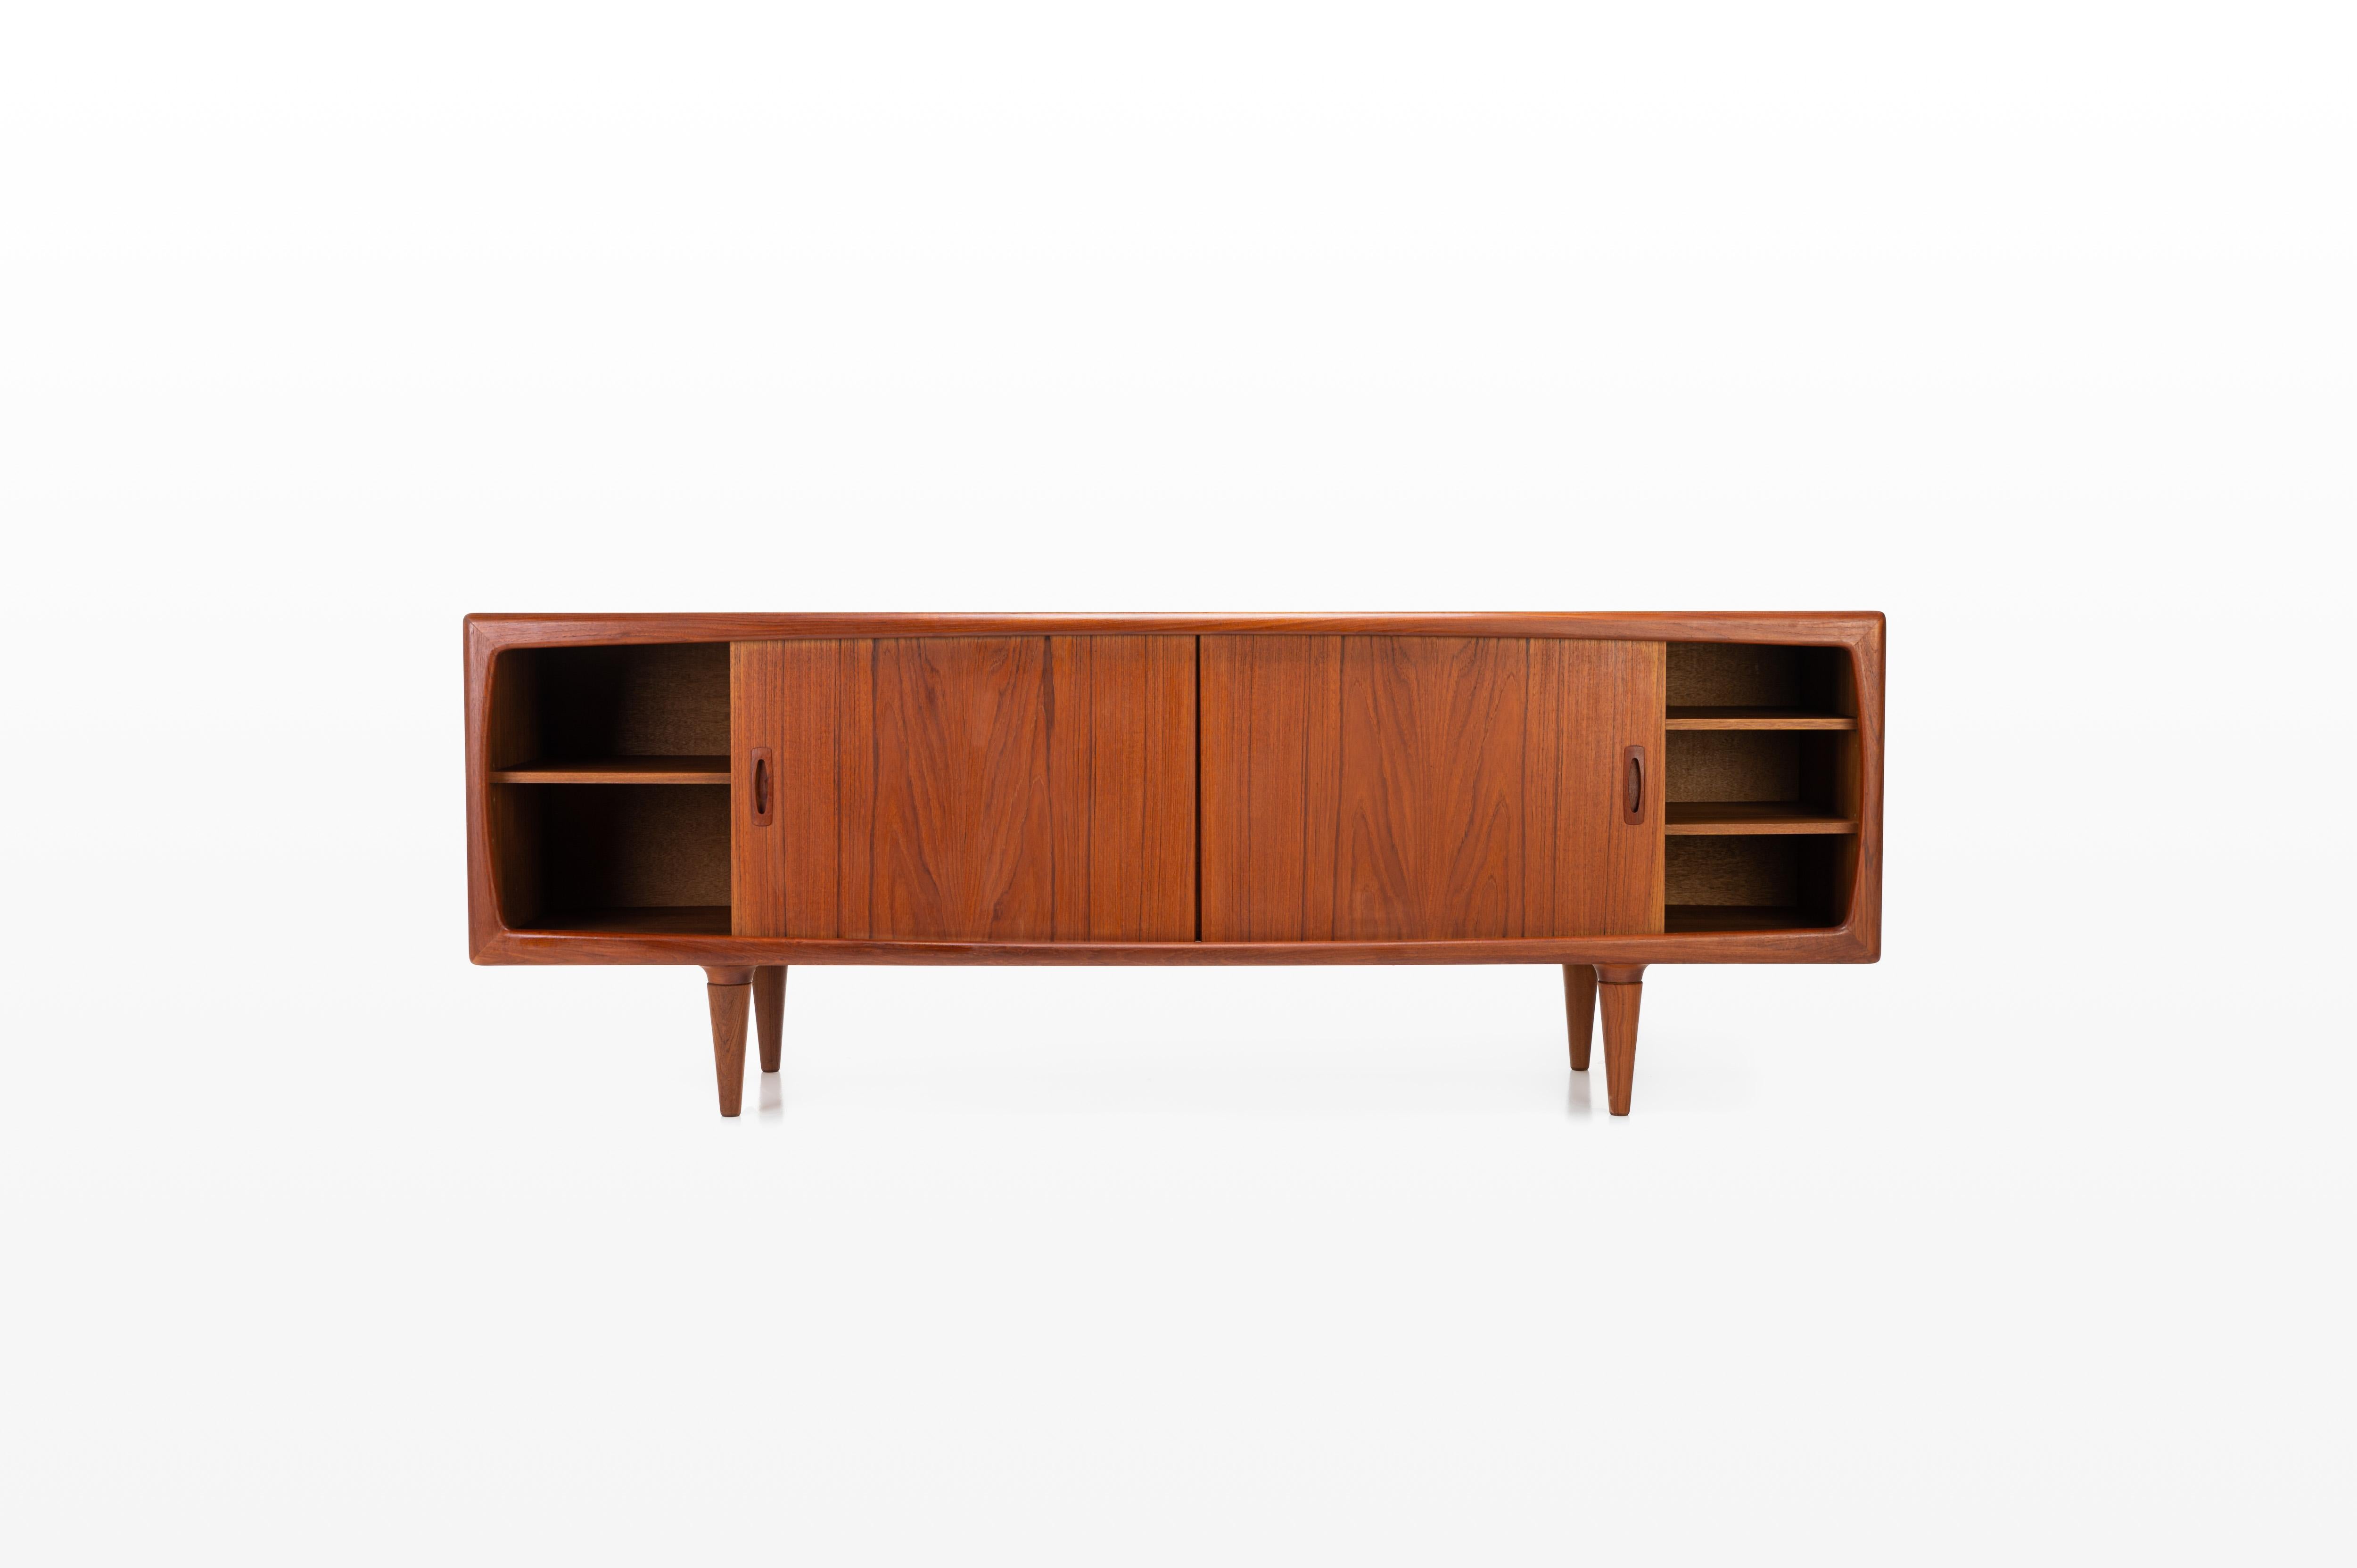 This sideboard is produced by HP Hansen, Denmark. There are two sliding doors, four drawers and shelves. The sideboard is finished in teak and is in very good condition.